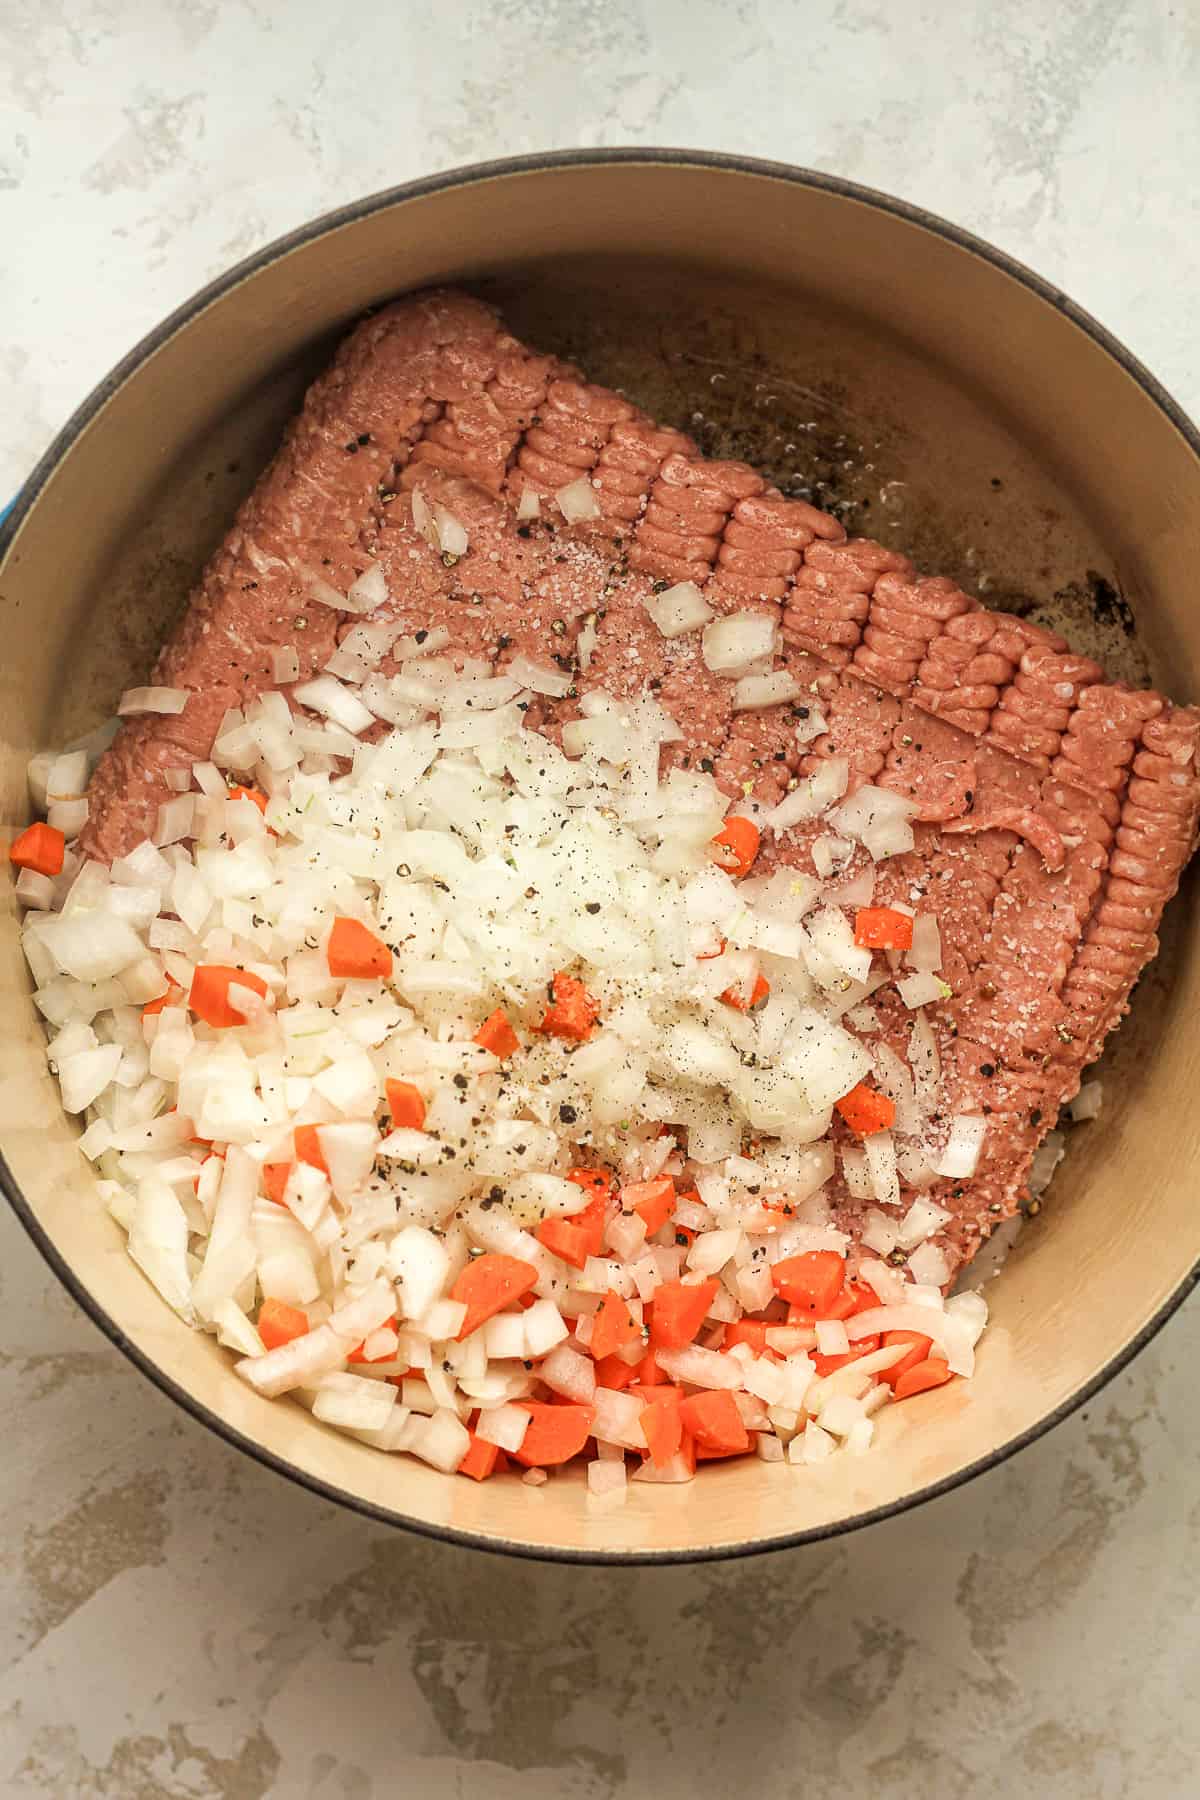 A pot of the raw ground turkey and onions and carrots on top.